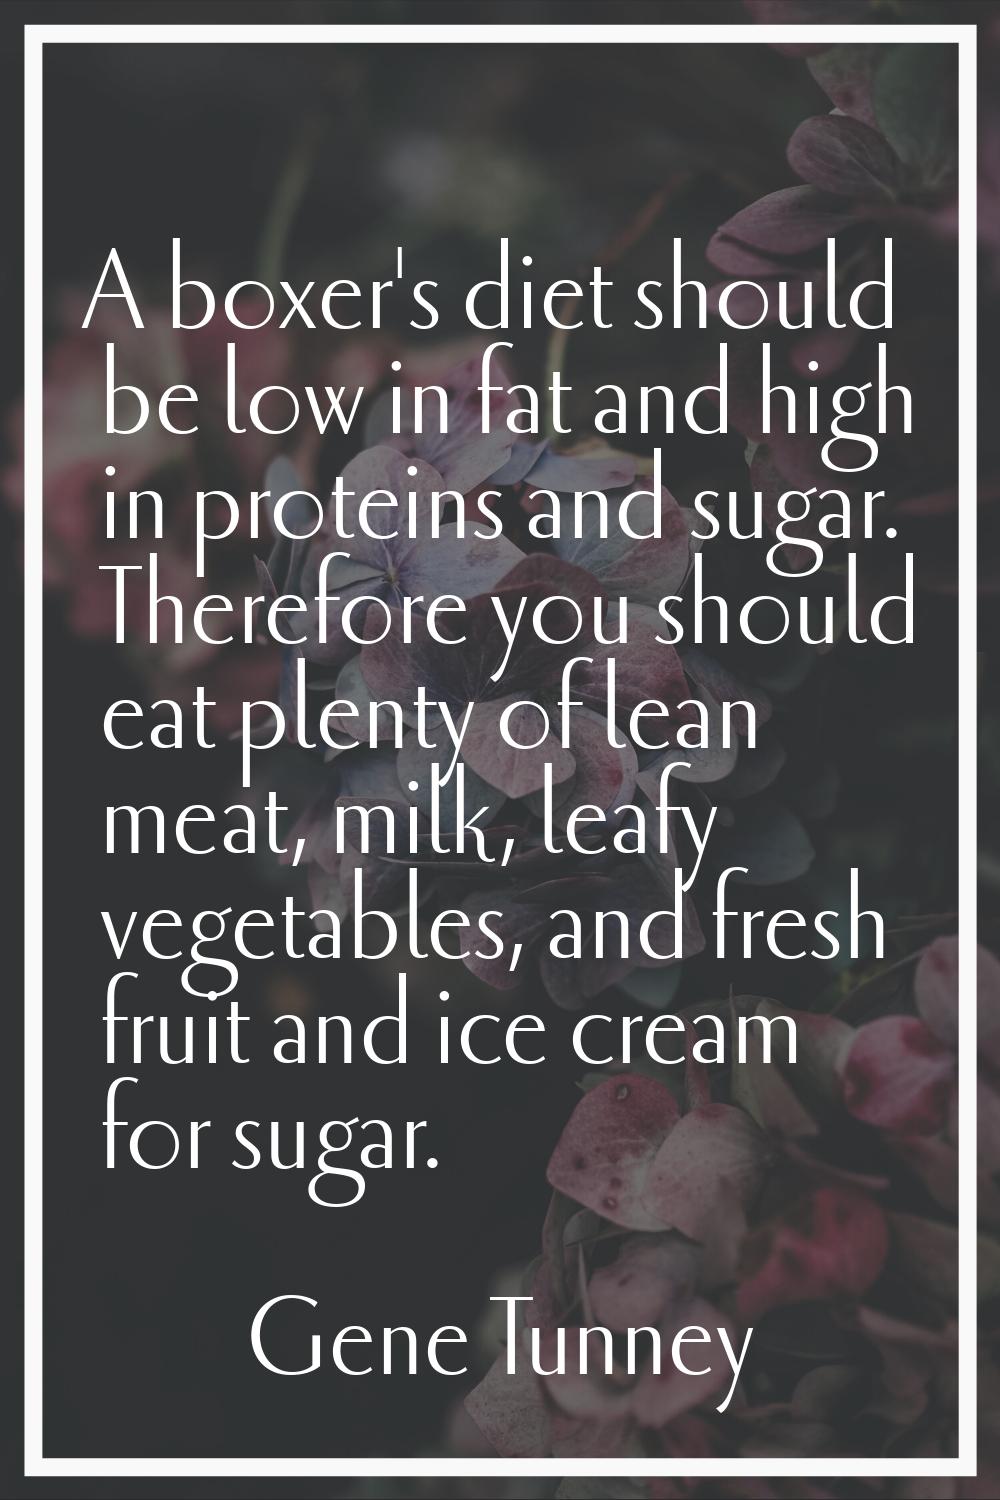 A boxer's diet should be low in fat and high in proteins and sugar. Therefore you should eat plenty